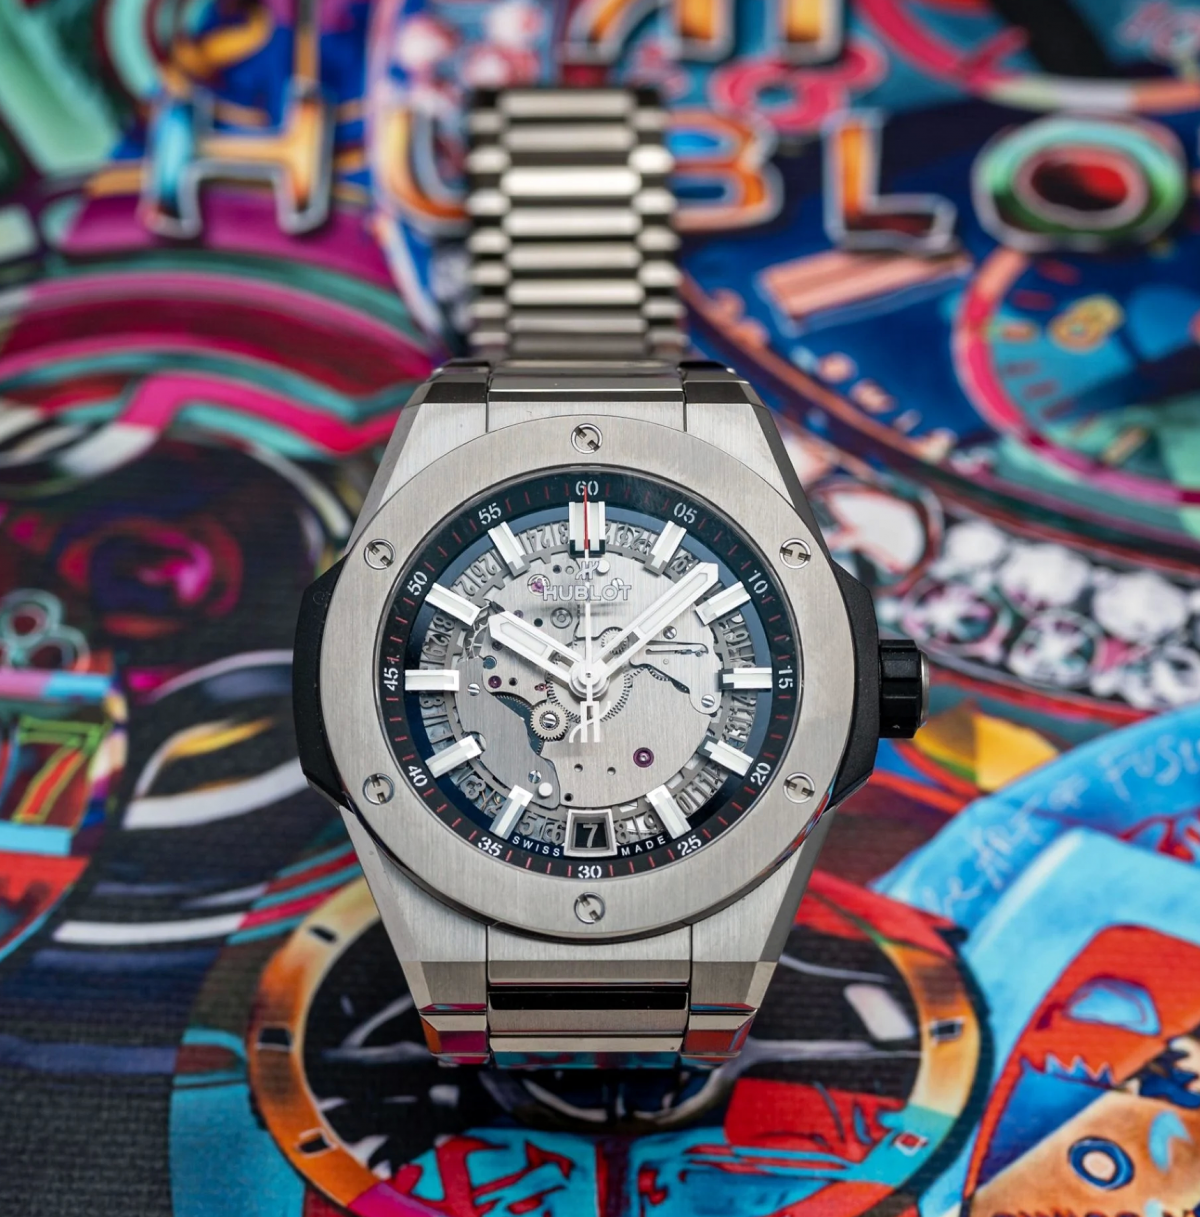 INTRODUCING: The Best UK Replica Hublot Big Bang Integral Time Only